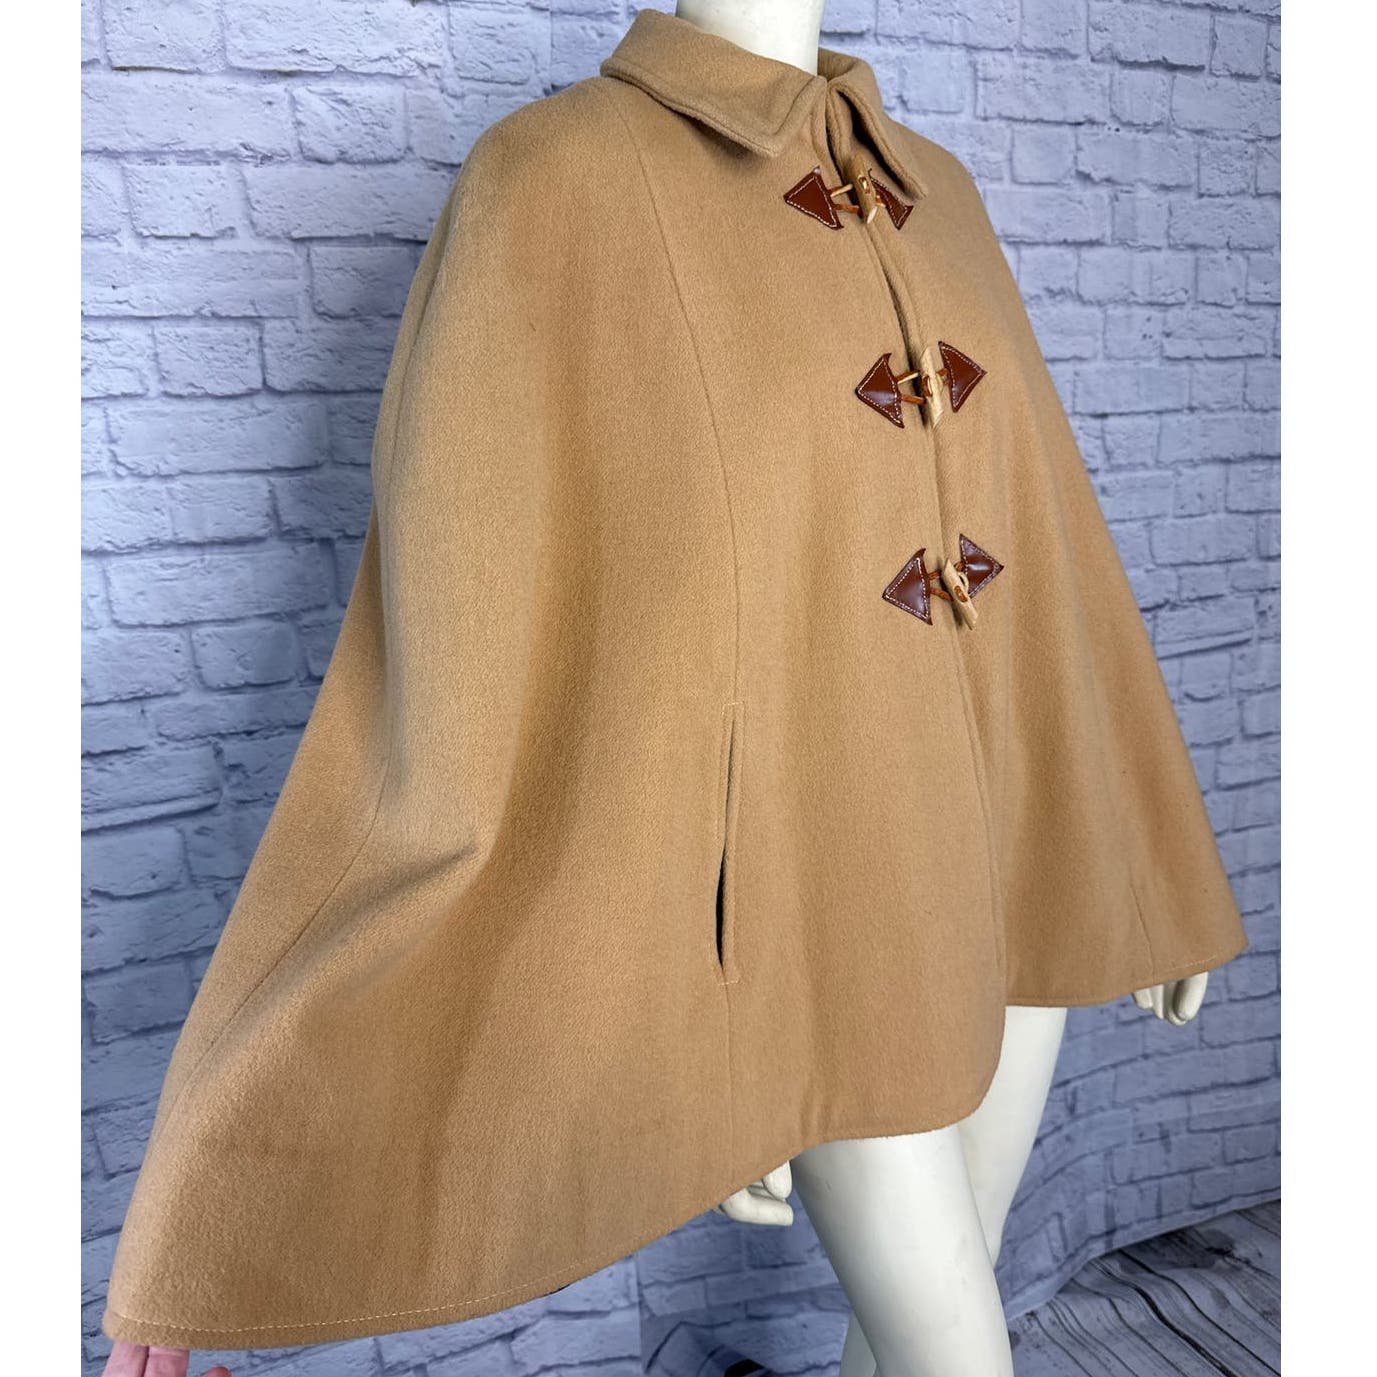 American Vintage Cape with toggle closing & arm holes in camel color size medium GAfTitcKn